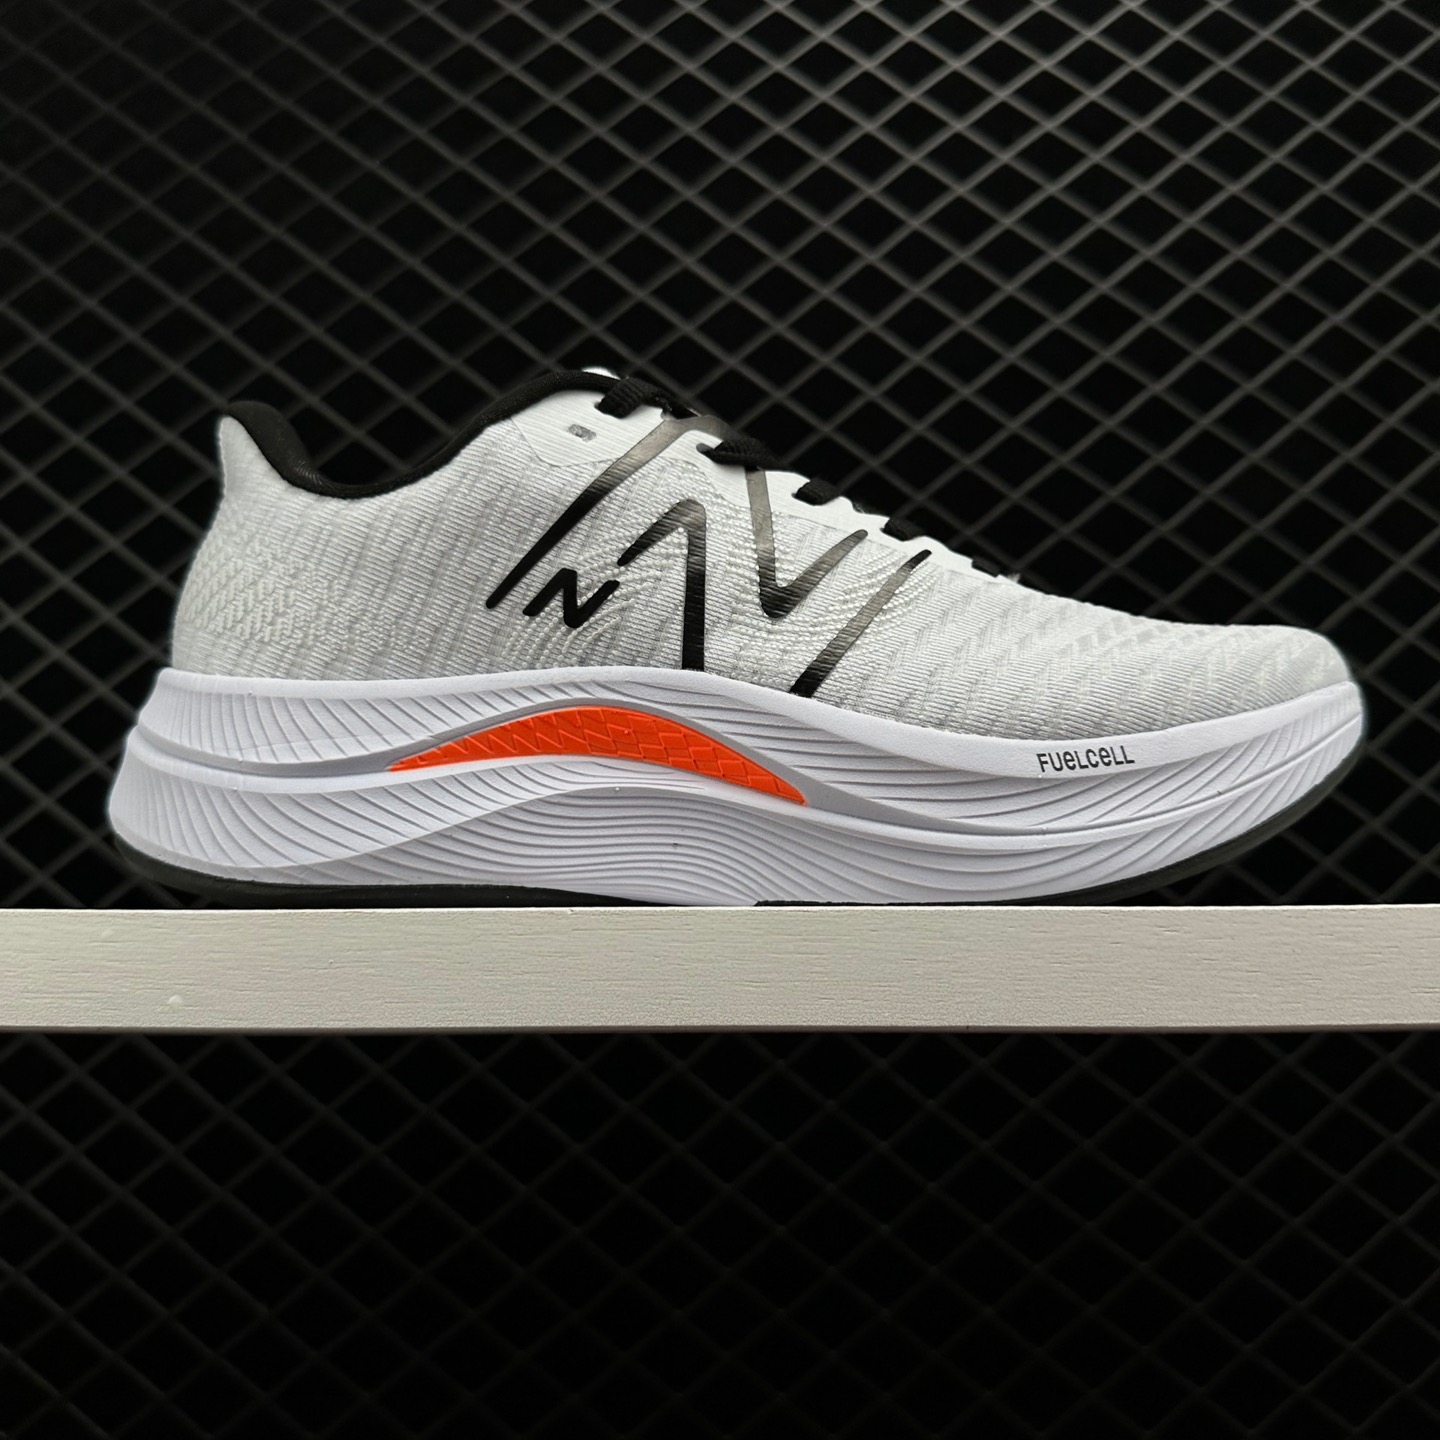 New Balance FuelCell Propel v4 'White Black' MFCPRLW4 - Lightweight Performance Running Shoes